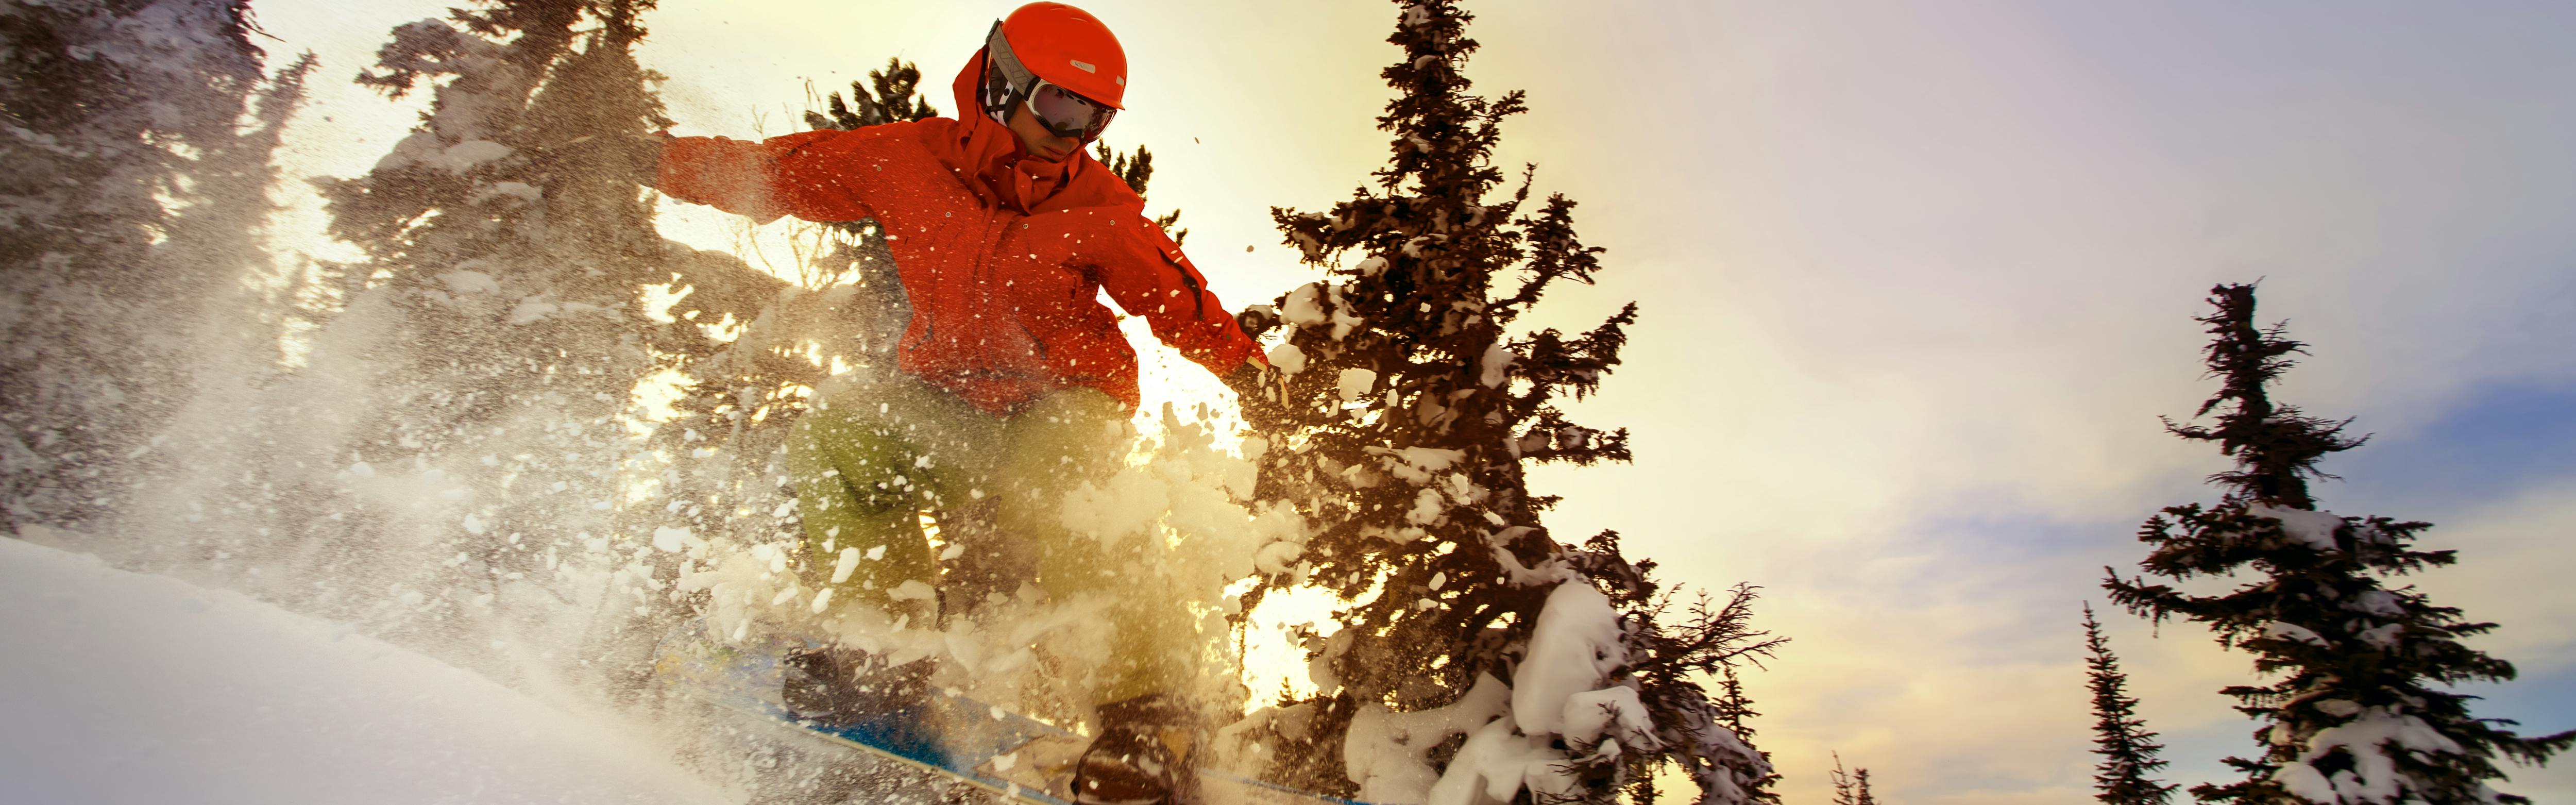 A man snowboarding down a powdery trail. There are trees and a sunset behind him. 